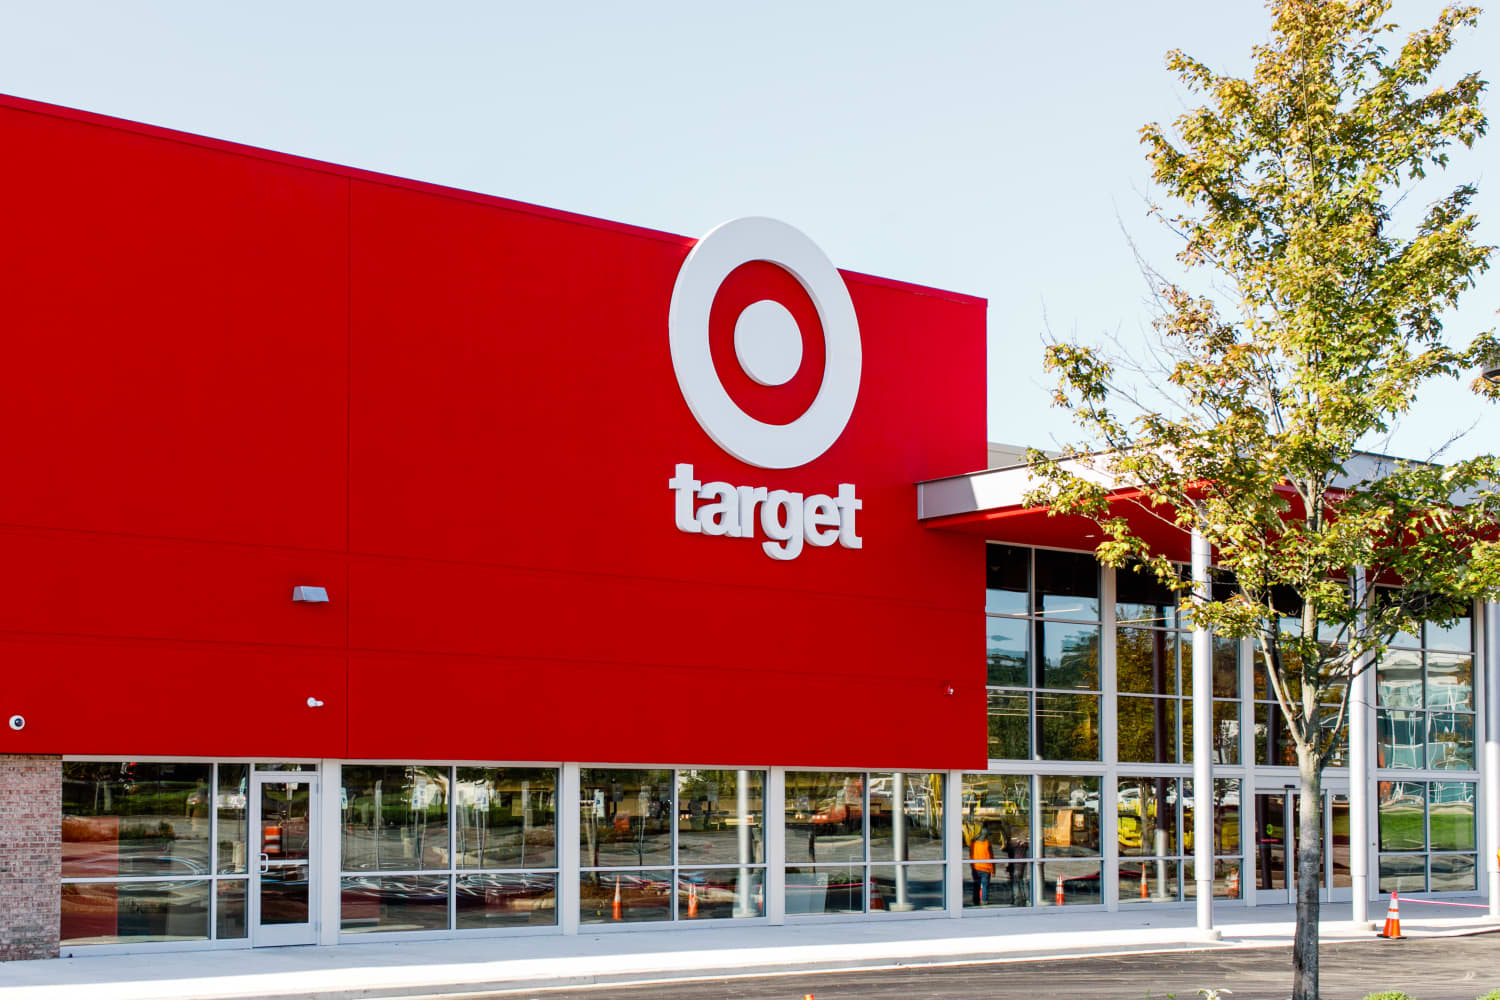 Target's Version of the Stanley Cup Might Be Better Than the Original